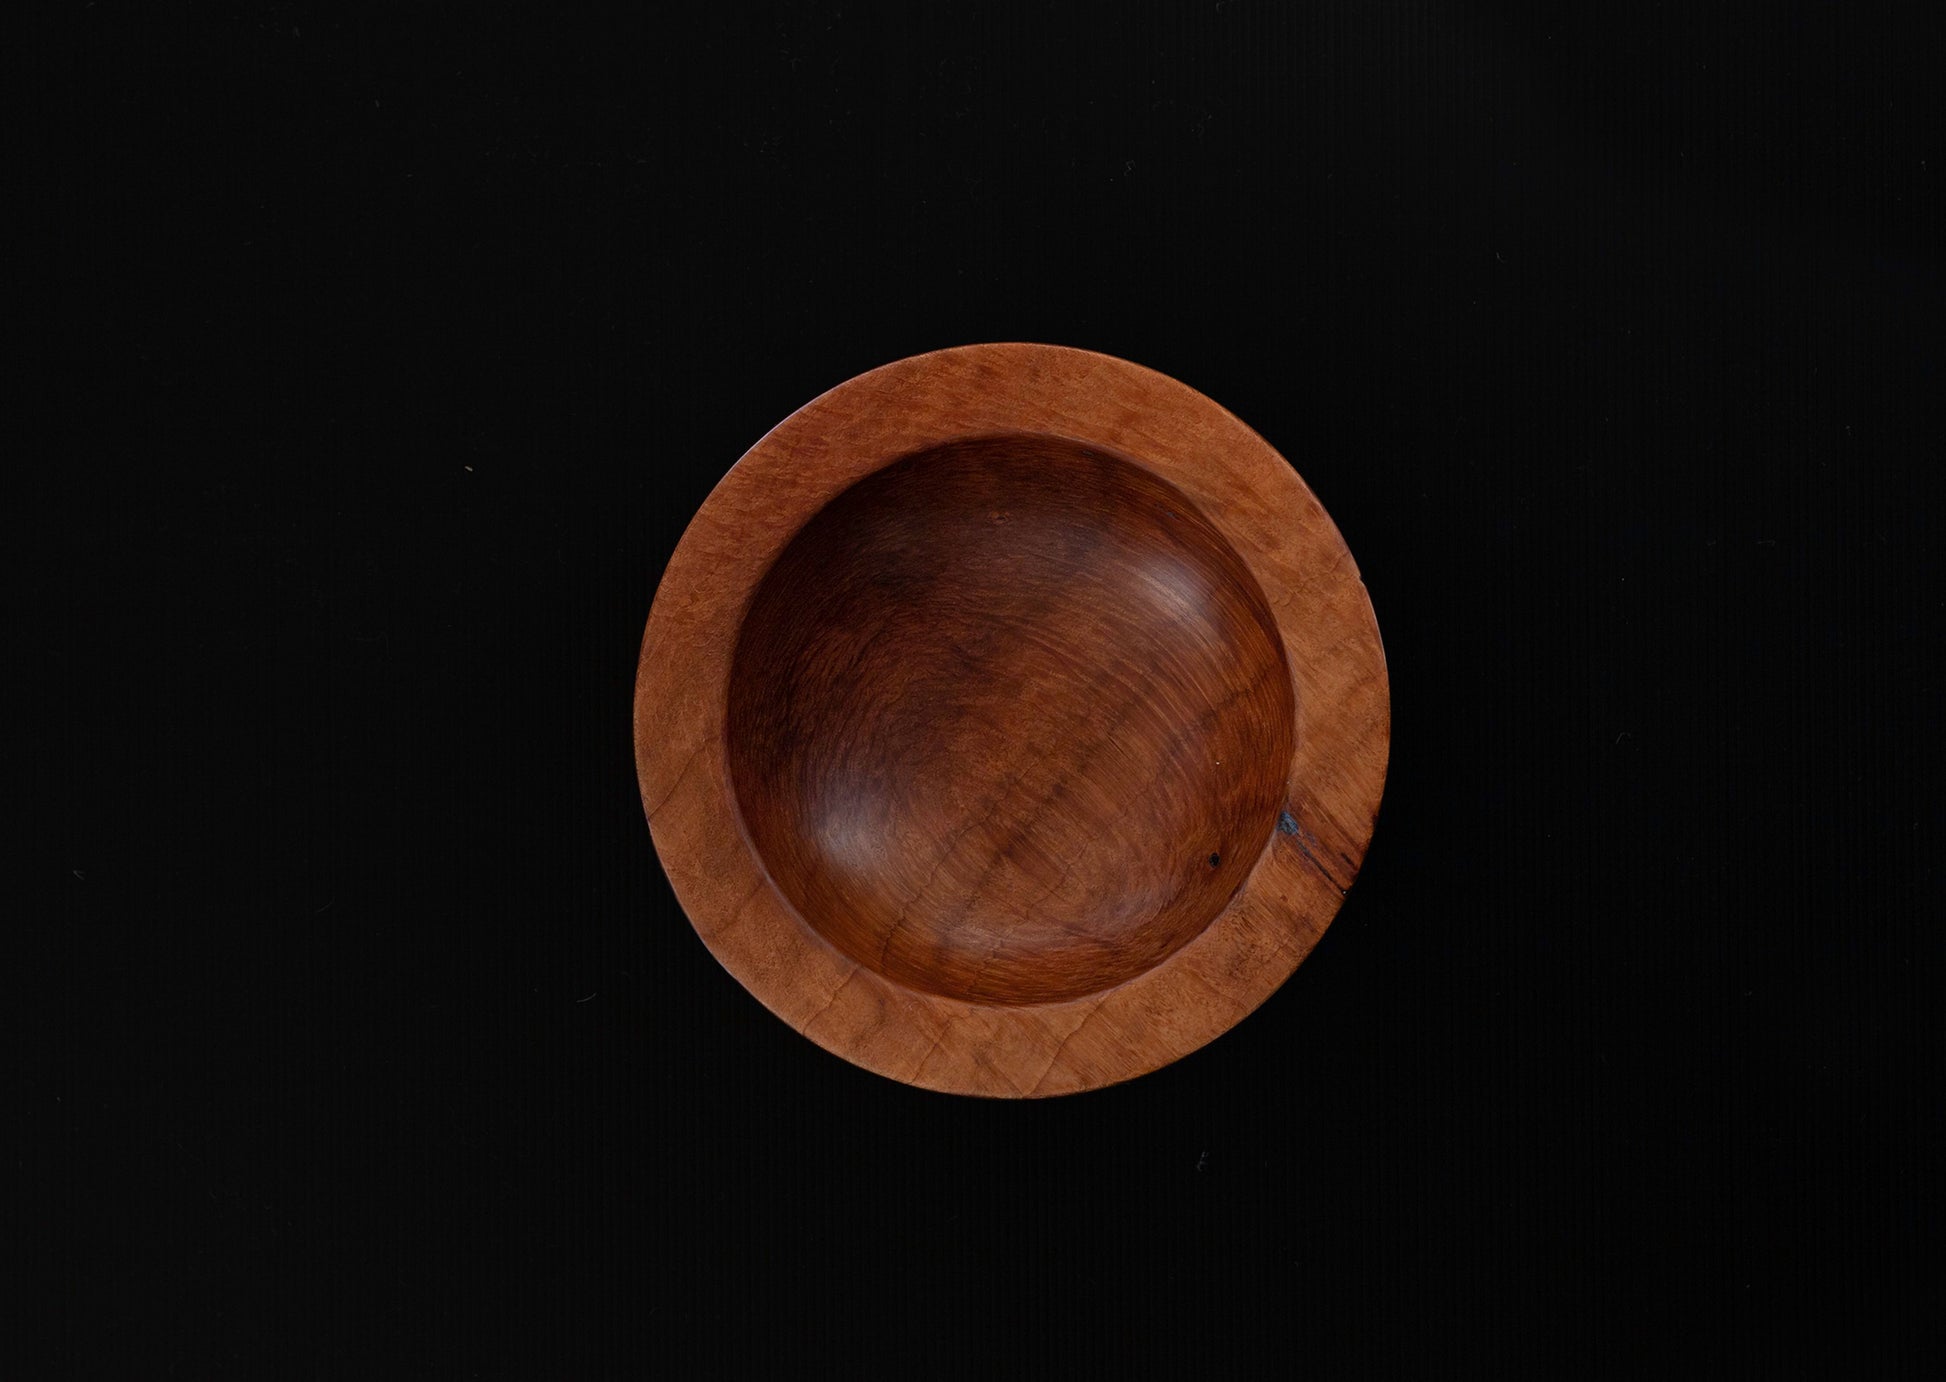 Redwood Burr Wood Bowl by Woodturner Mark Russell No377